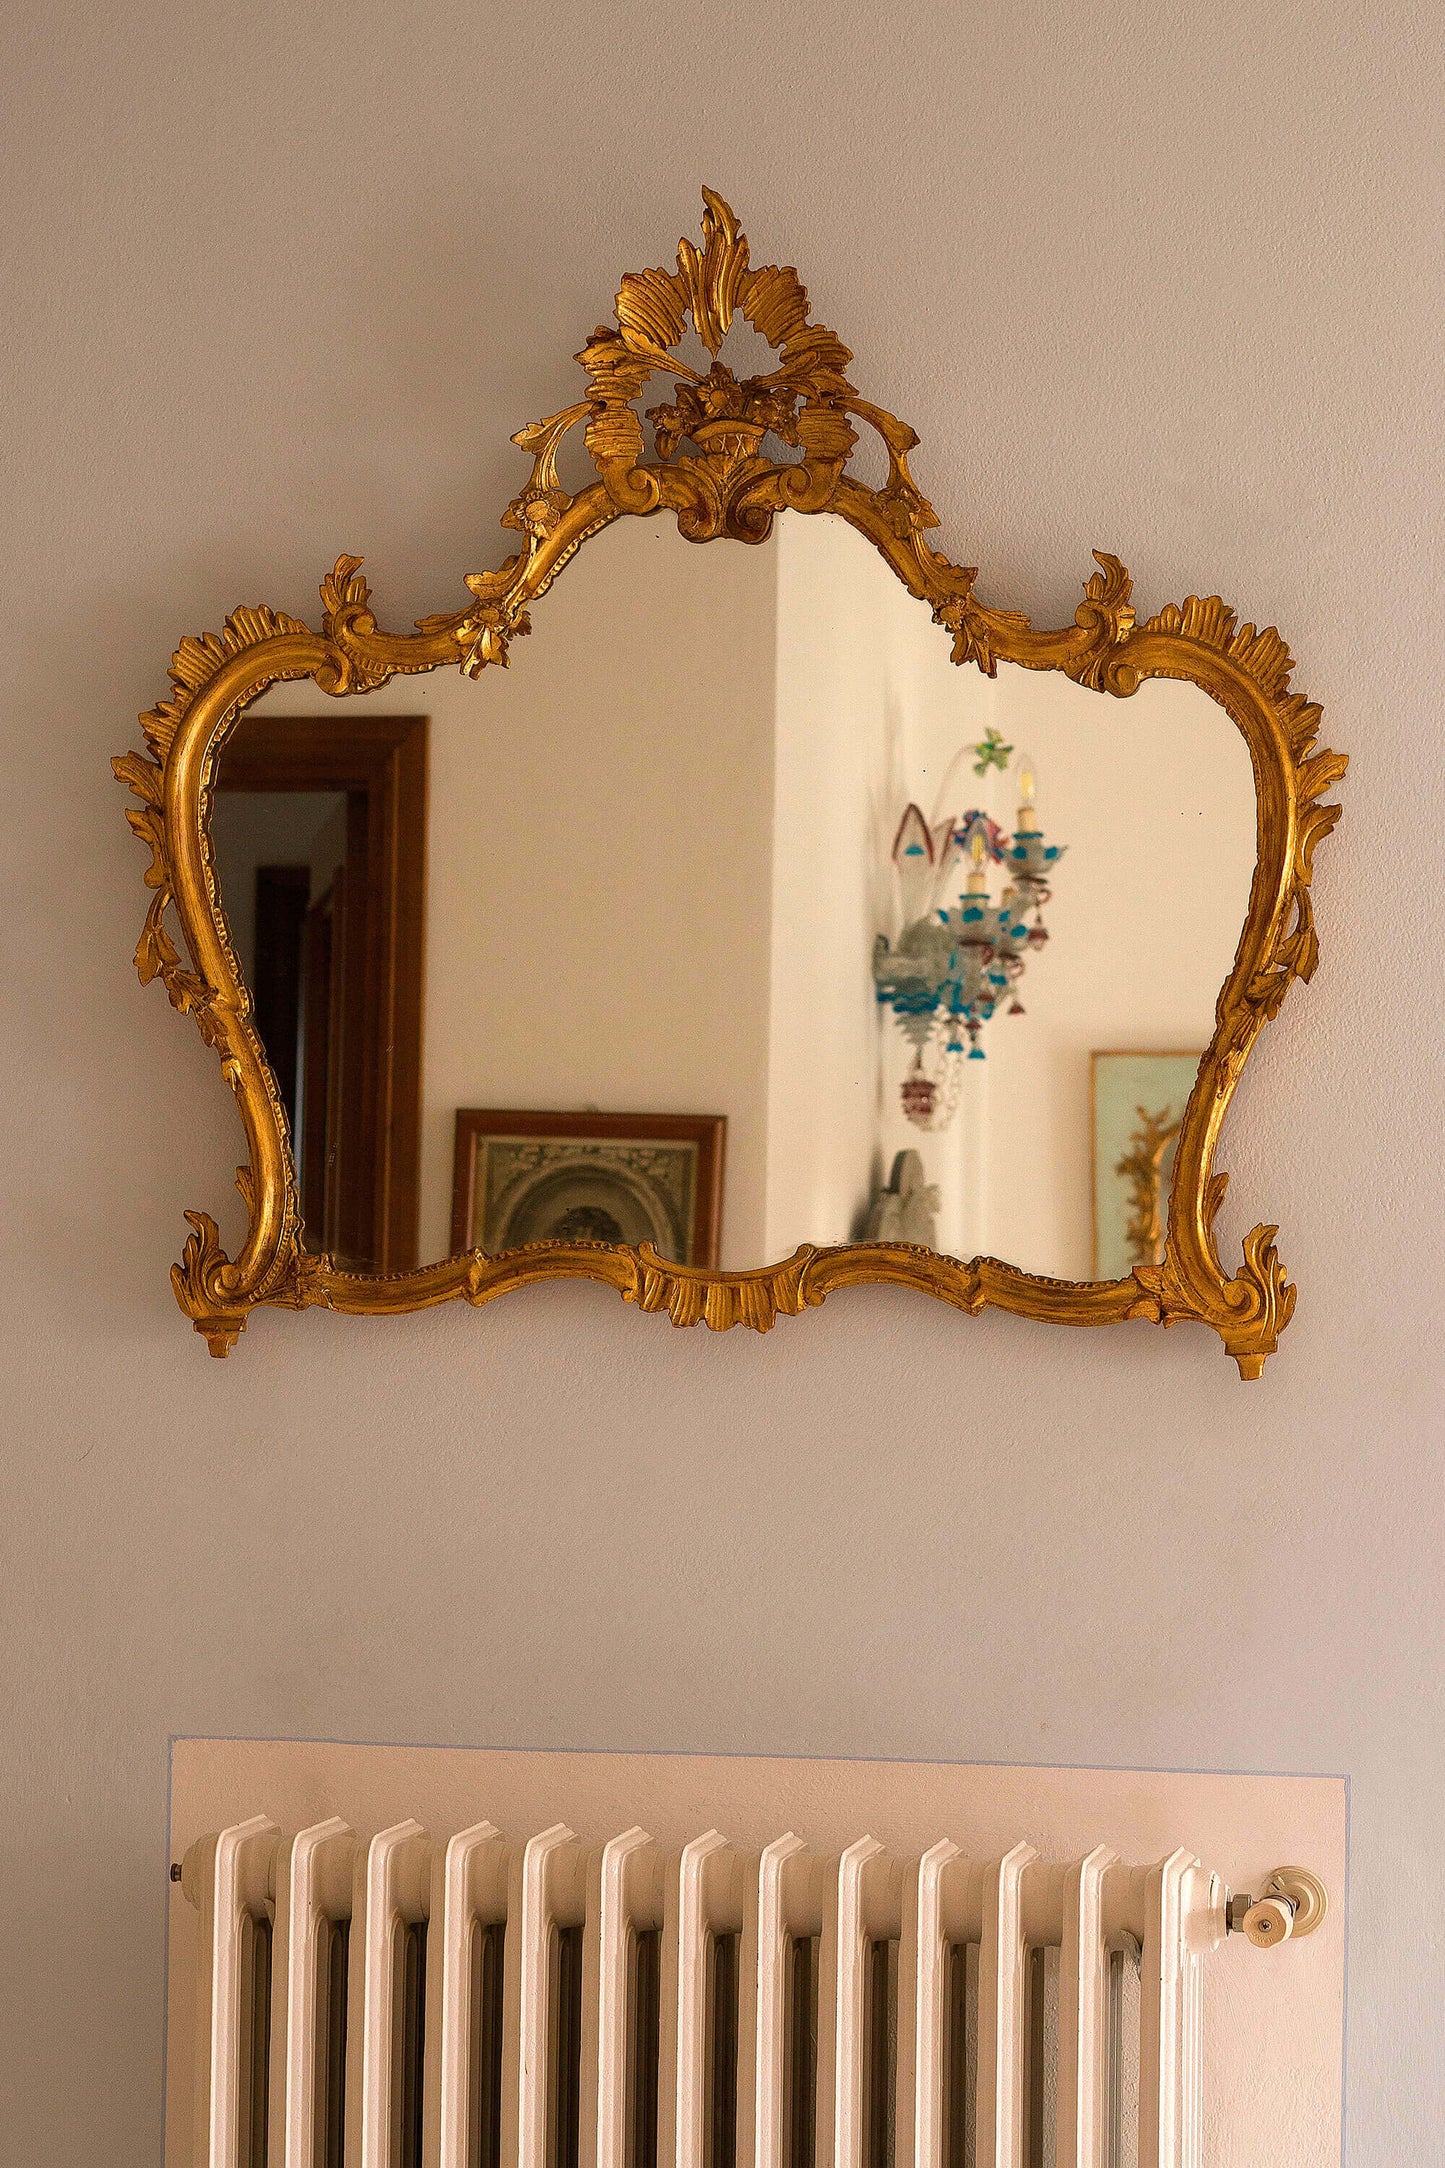 Louis XV style mirror (Rococò), in carved and gilded wood